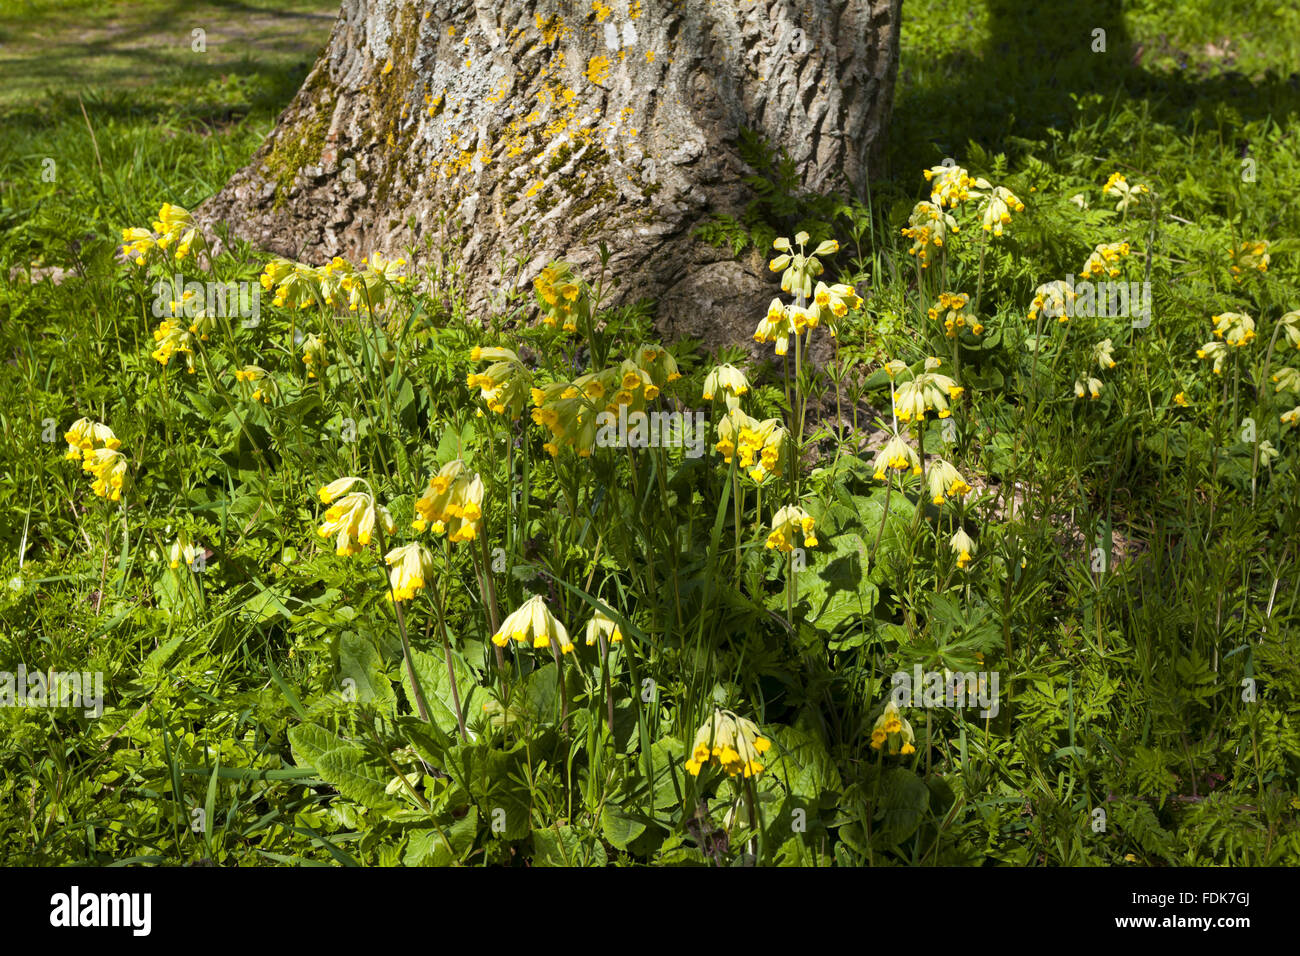 Cowslips (Primula veris) in the garden in April at The Vyne, Hampshire. Stock Photo